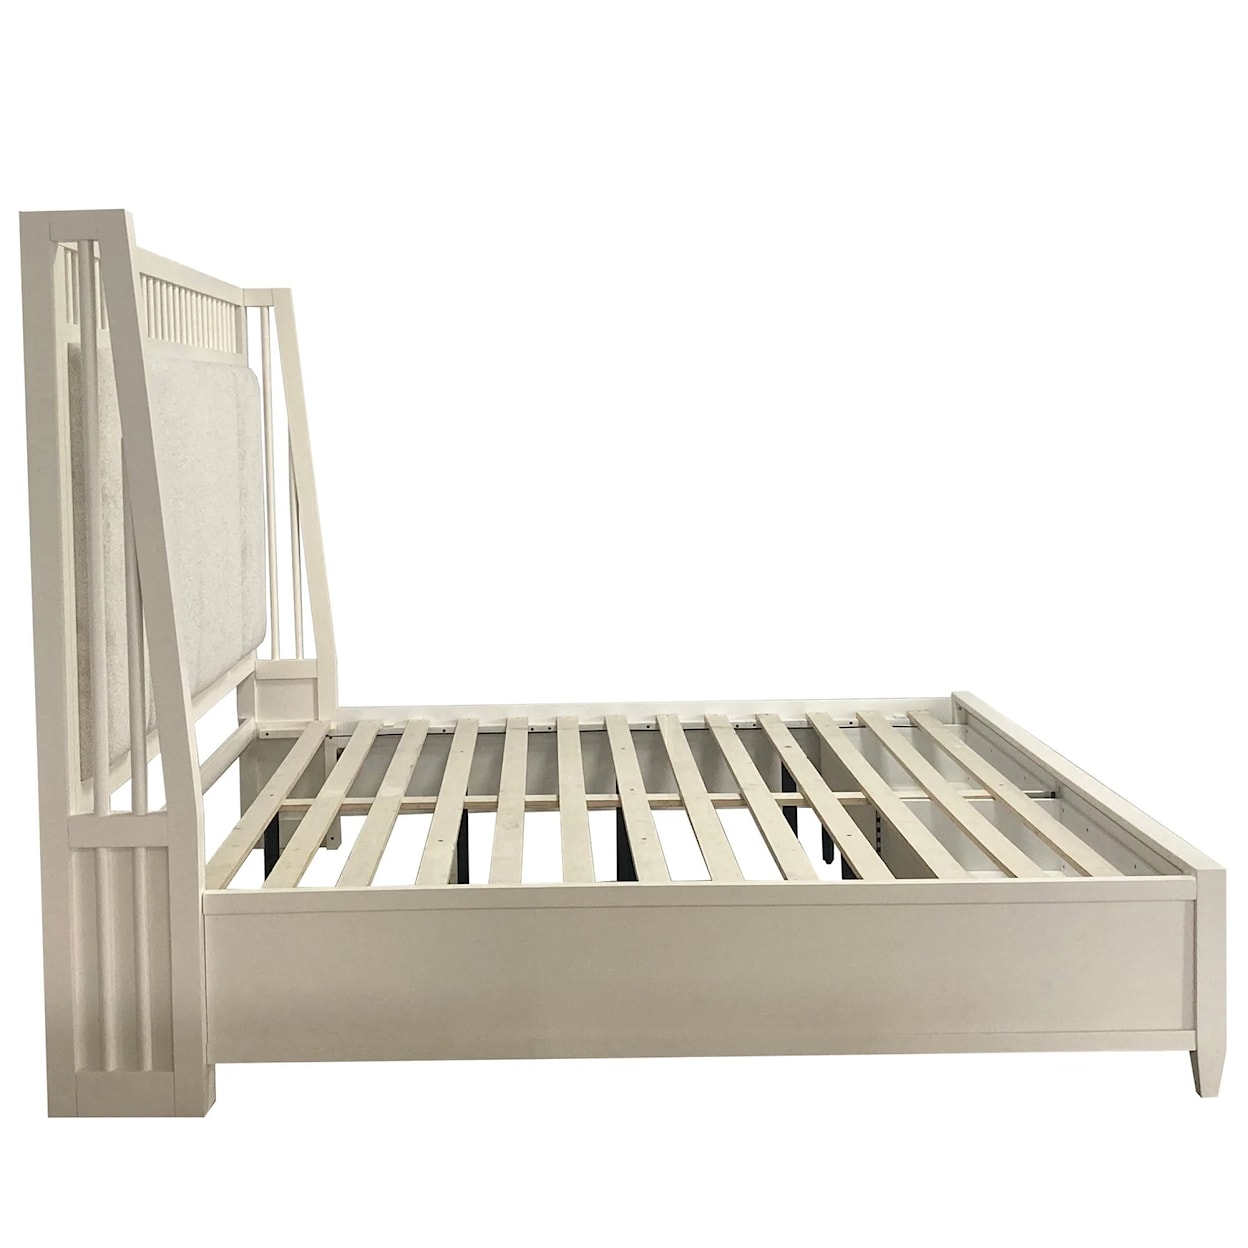 Paramount Furniture Americana Modern Queen Shelter Bed